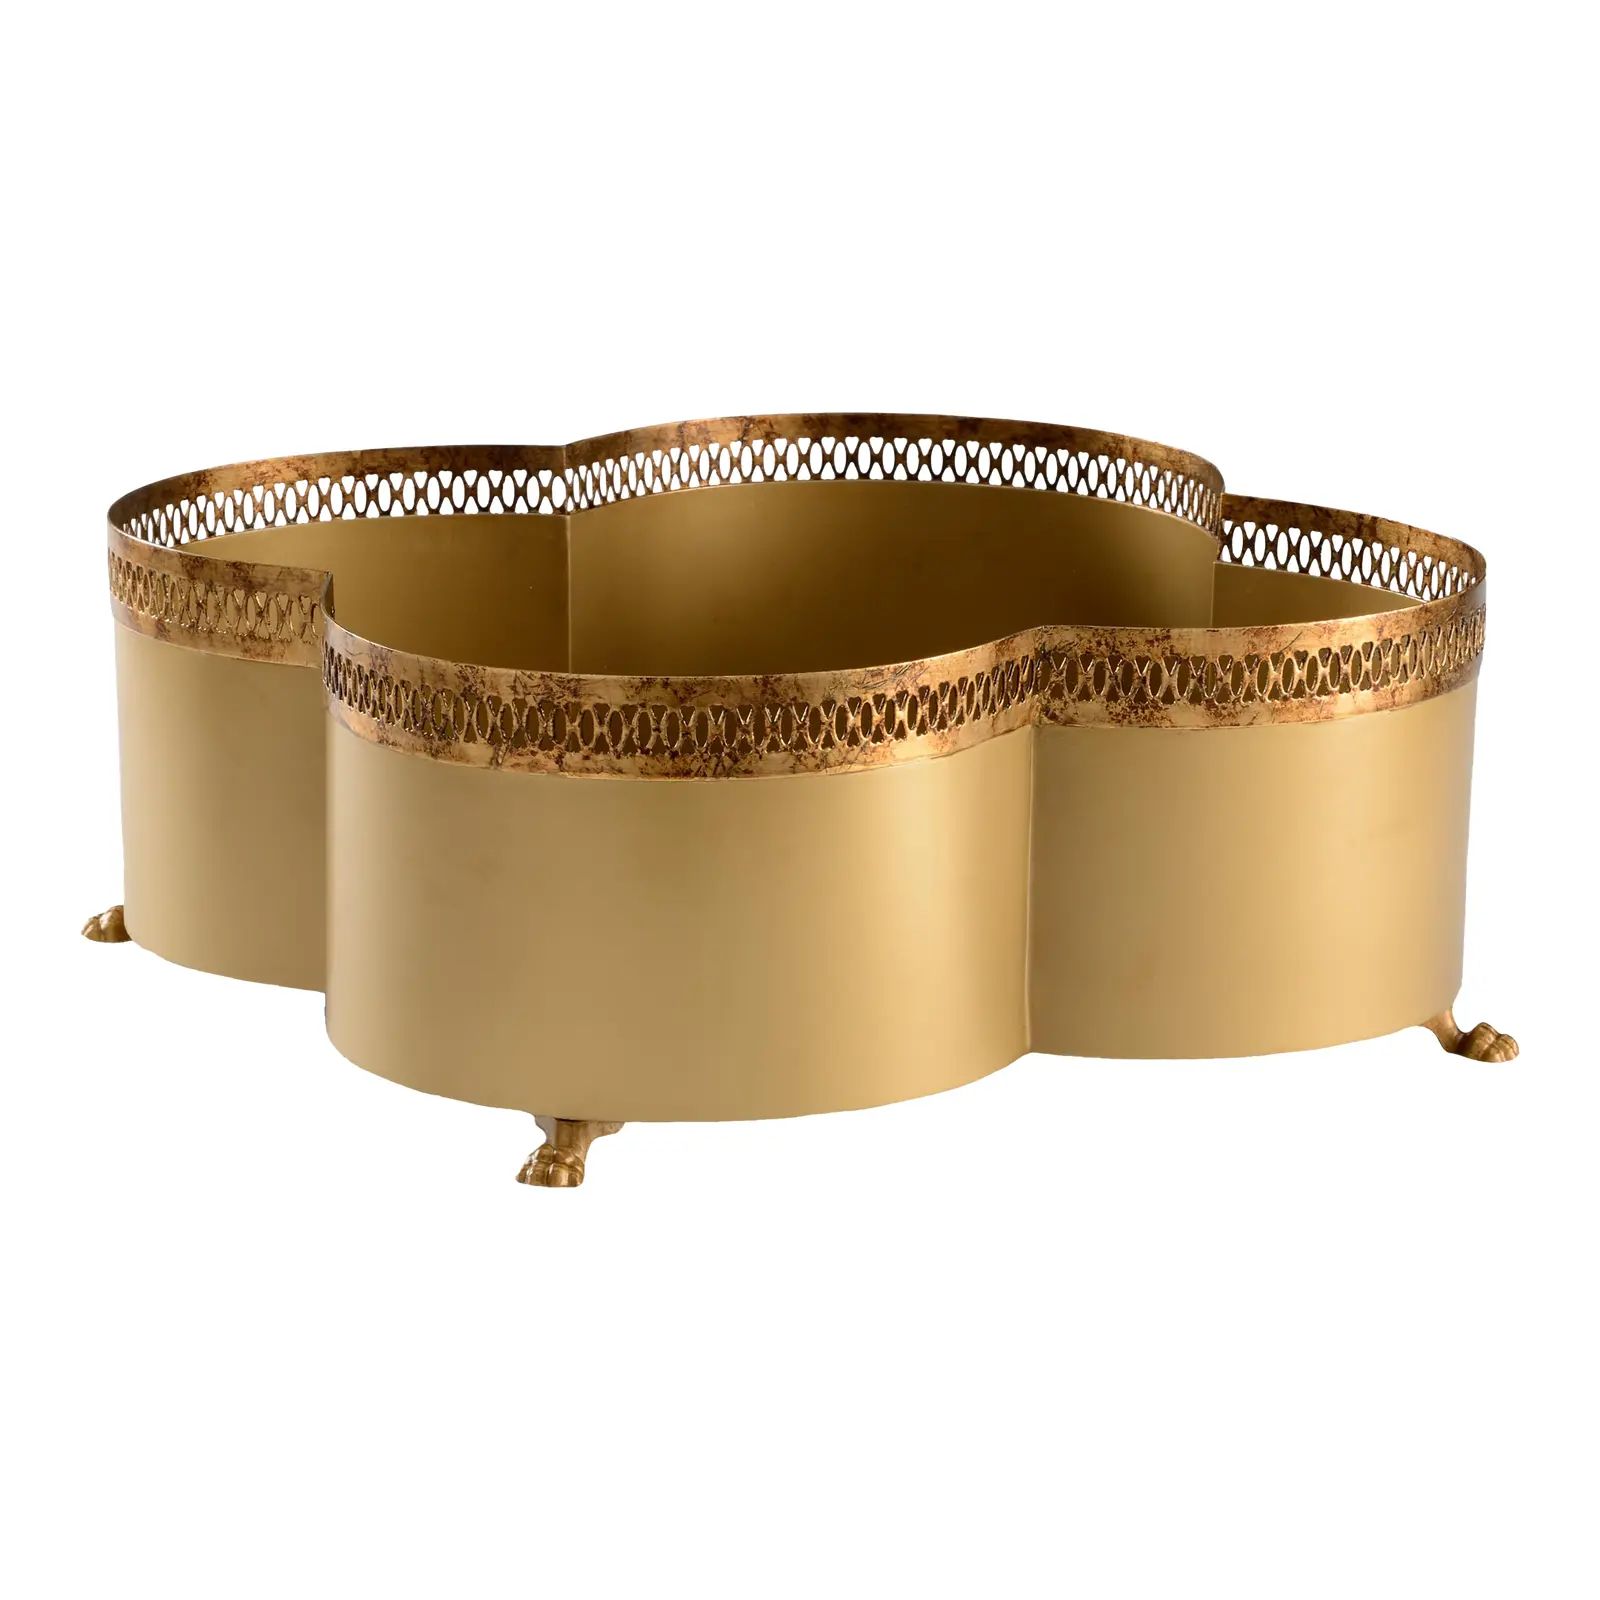 Tracery Cachepot with Antique Gold Finish | Chairish